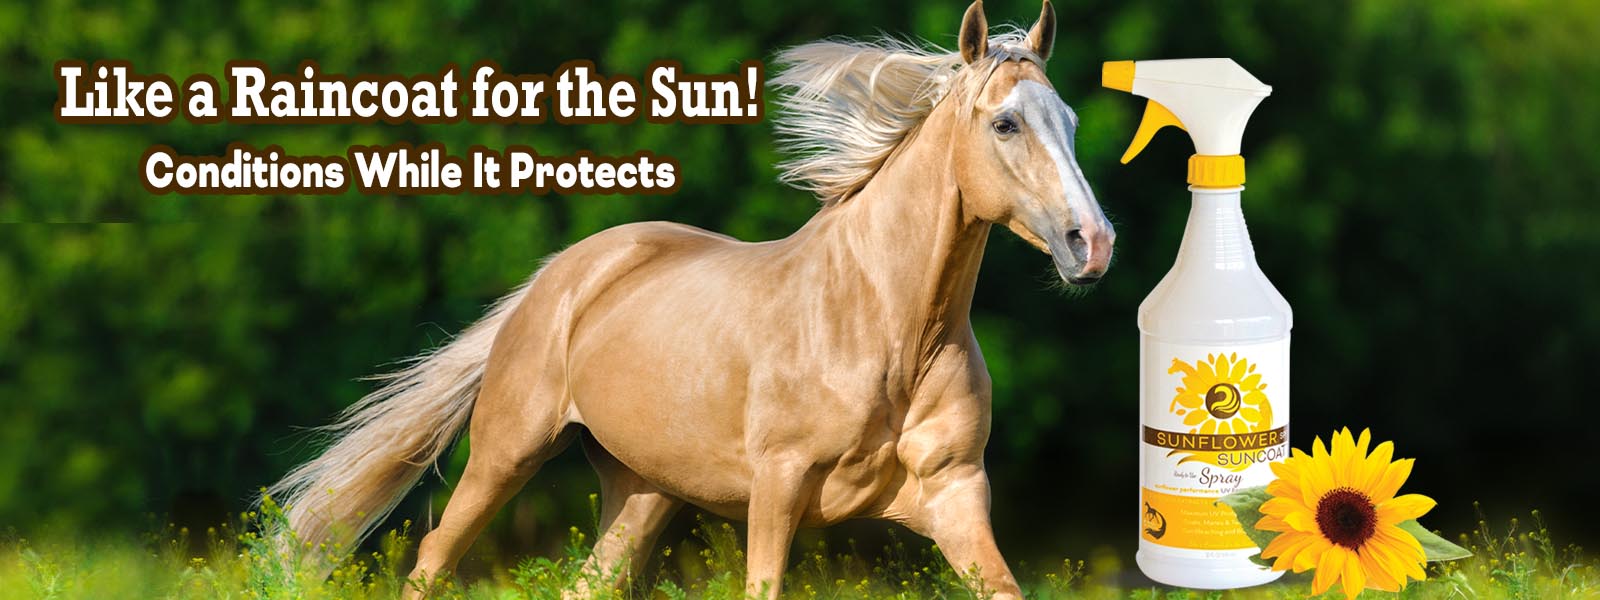 Horse Sunscreen SPF Sunflower Suncoat for Coat, Mane and Tail by Healthy HairCare